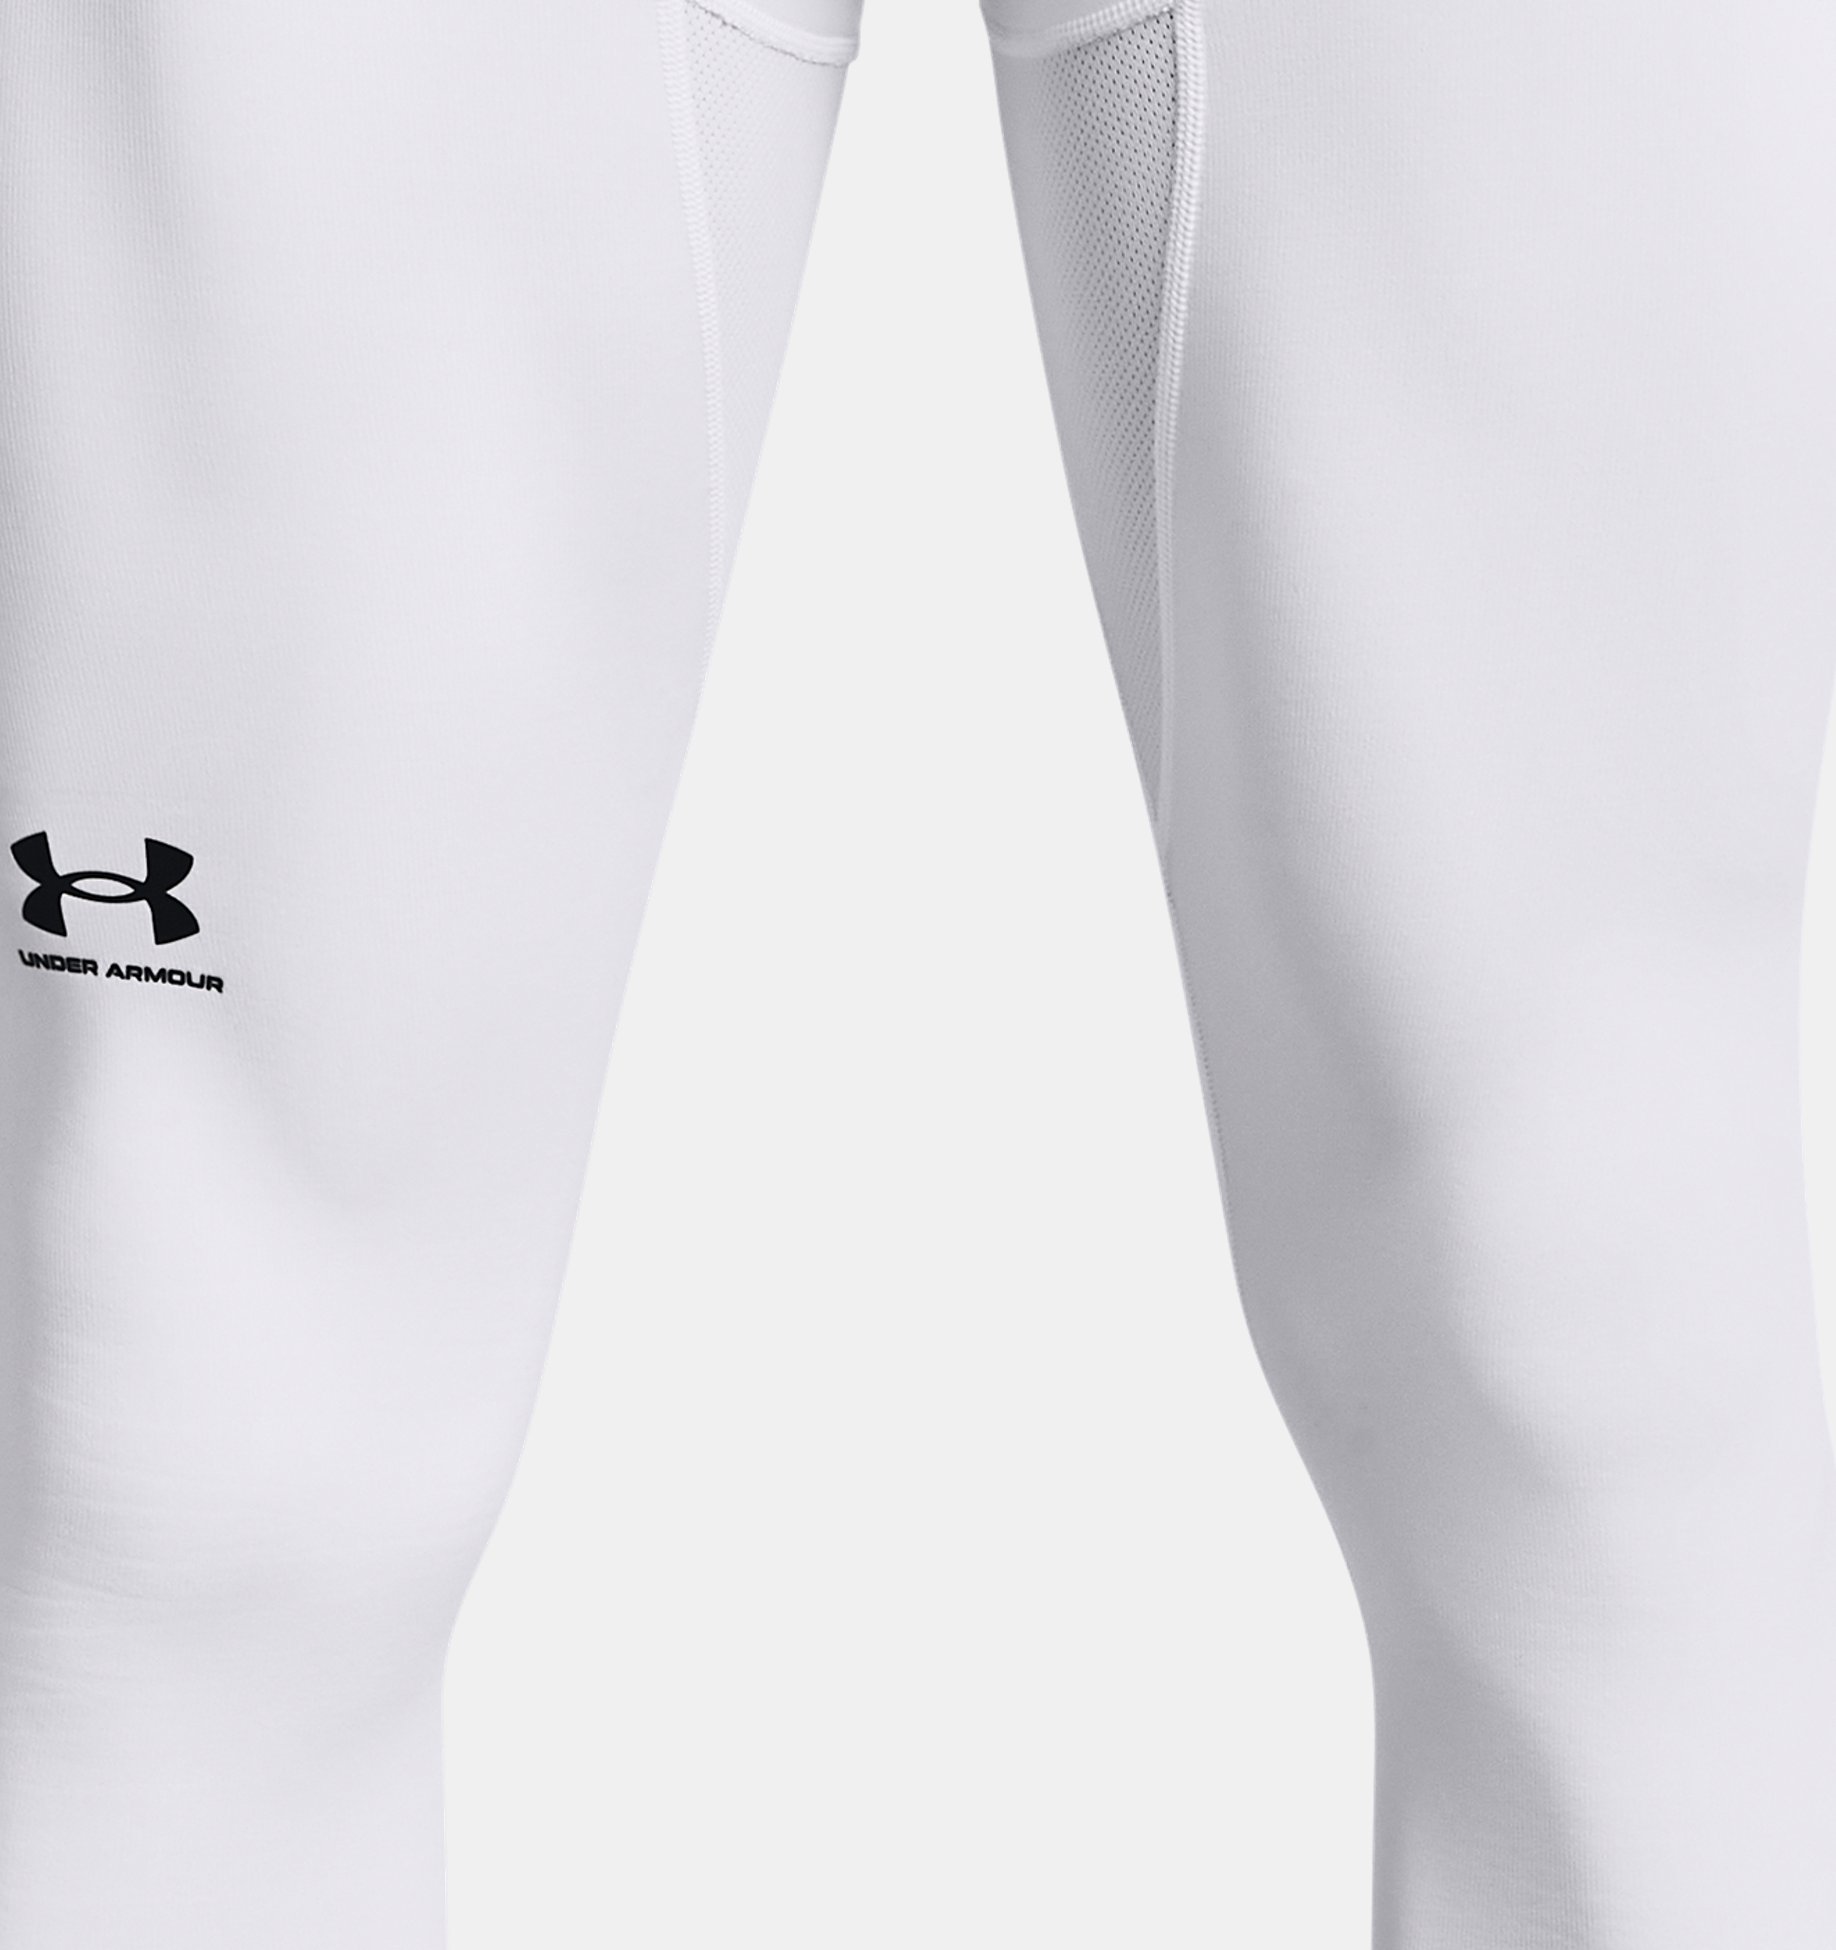 https://underarmour.scene7.com/is/image/Underarmour/PS1366075-100_HF?rp=standard-0pad|pdpZoomDesktop&scl=0.72&fmt=jpg&qlt=85&resMode=sharp2&cache=on,on&bgc=f0f0f0&wid=1836&hei=1950&size=1500,1500